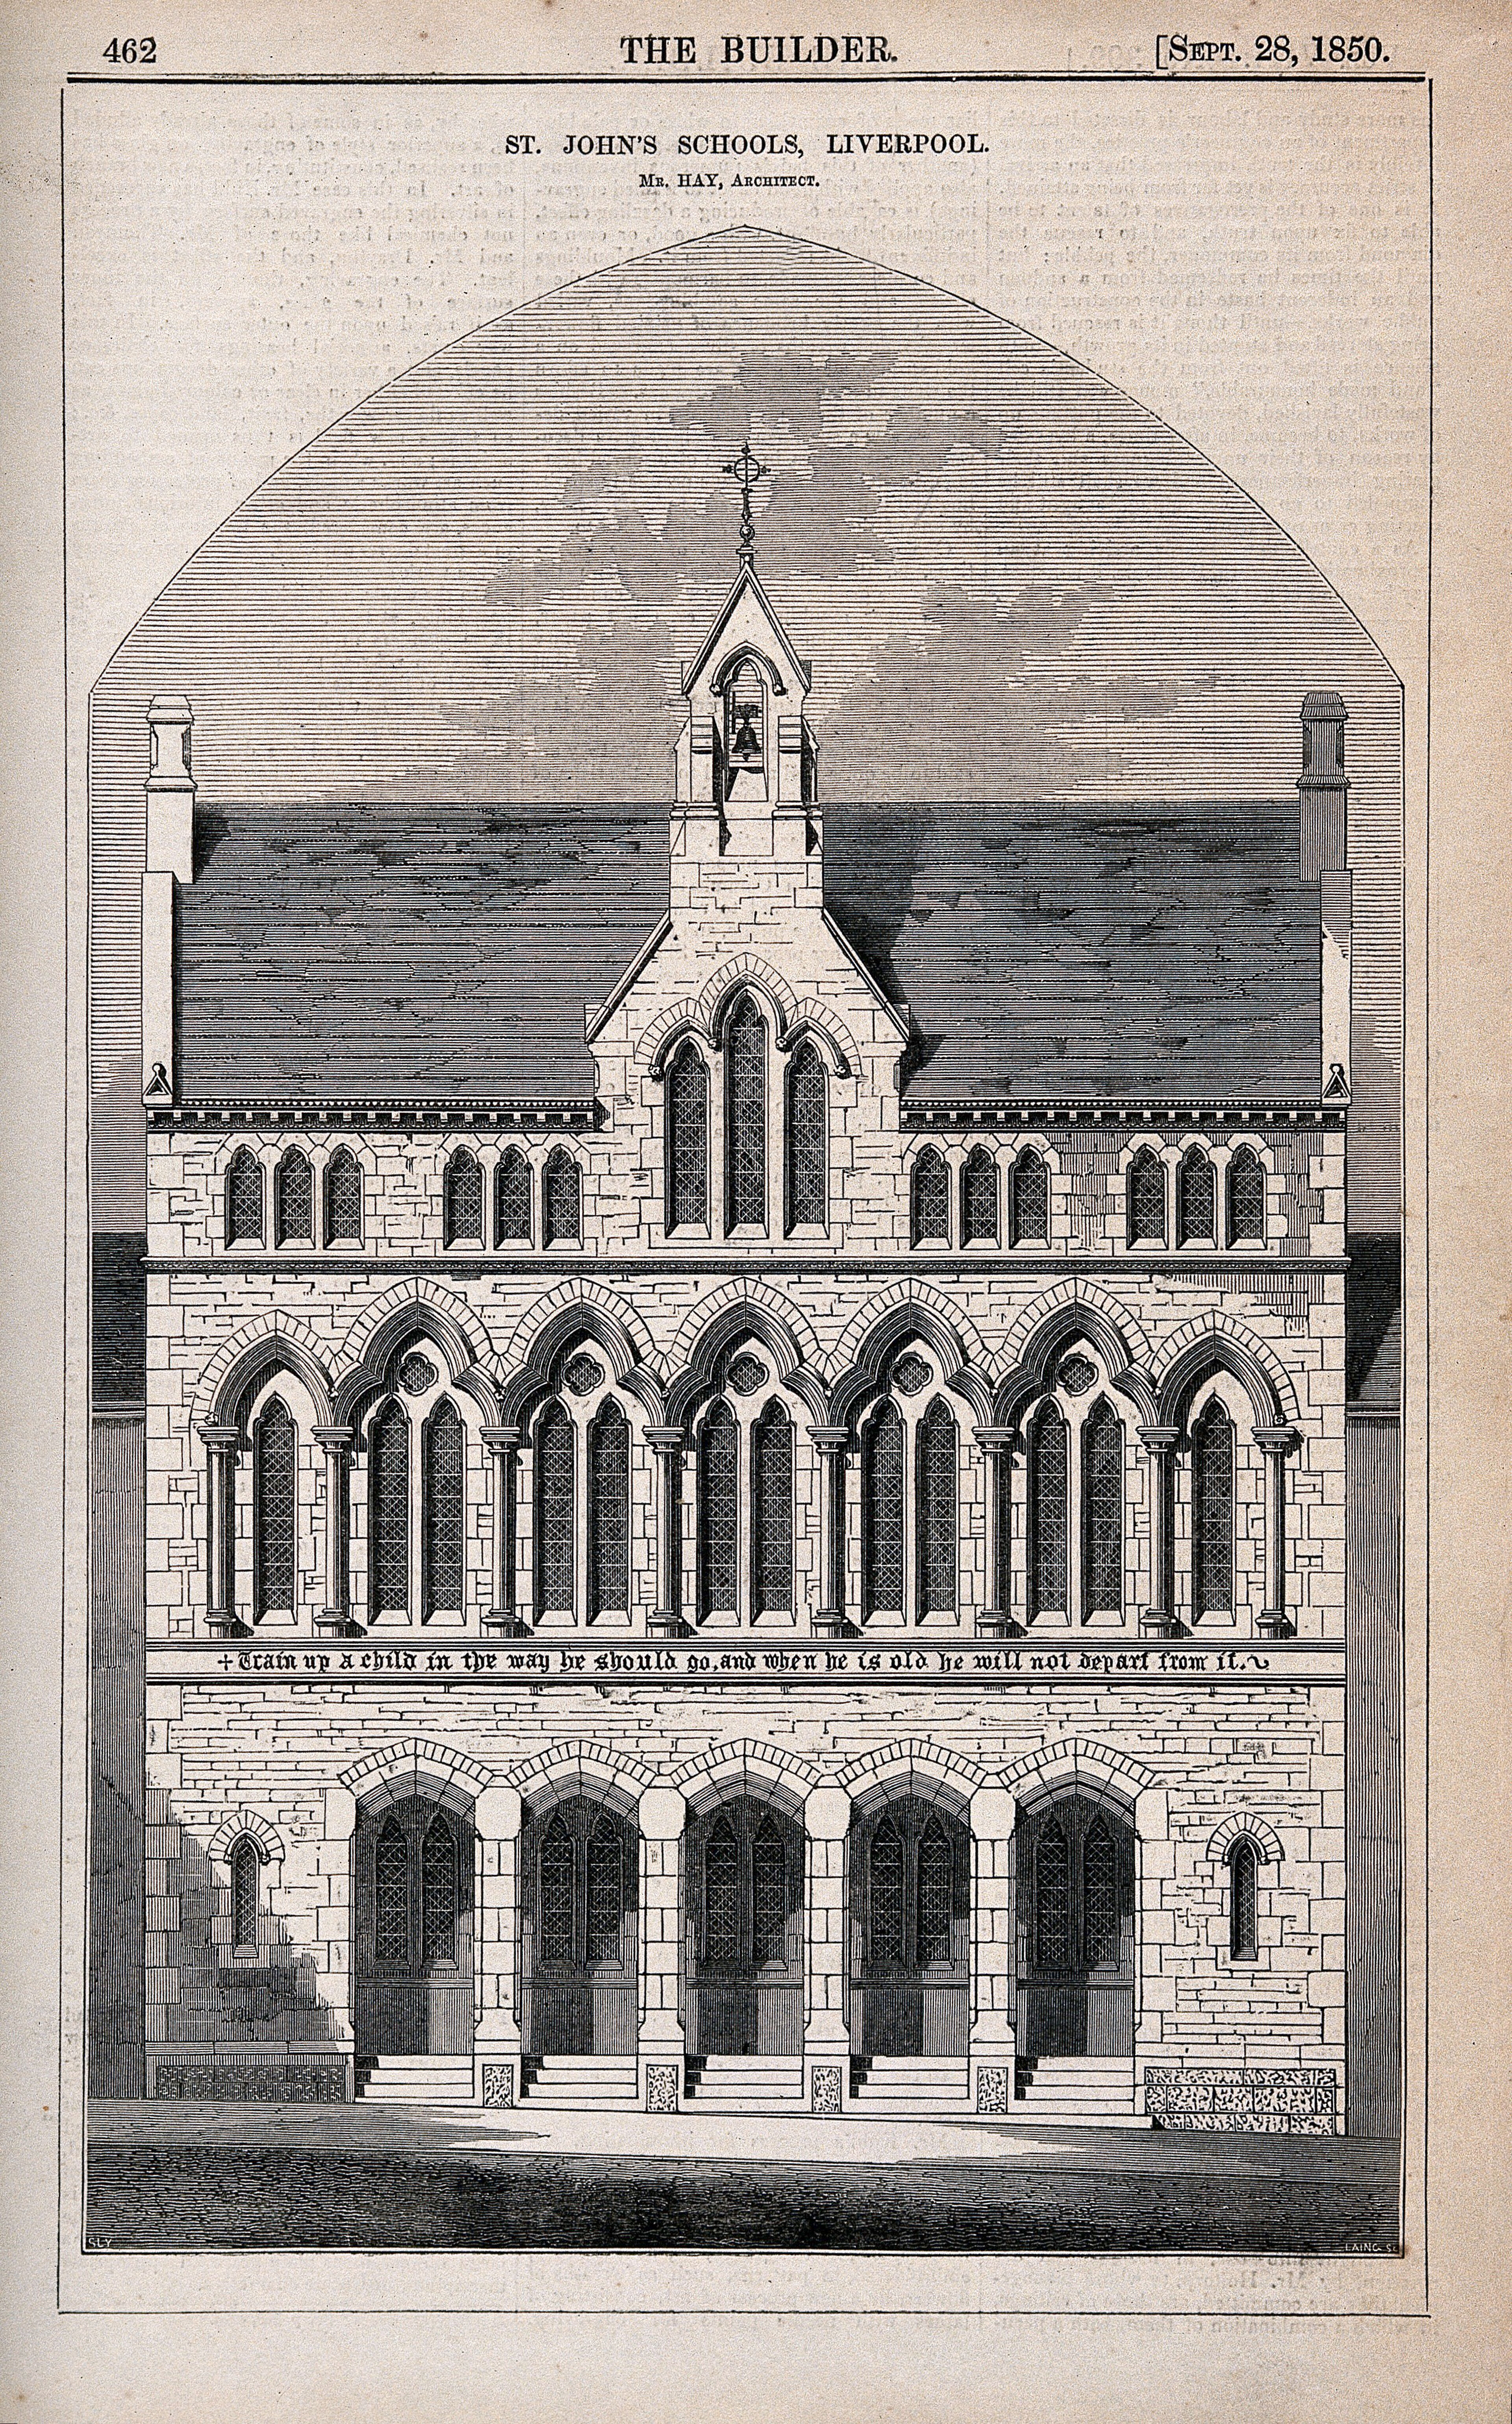 St. John's Schools, Liverpool, Merseyside. Wood engraving by Laing, 1850, after B. Sly after Hay.